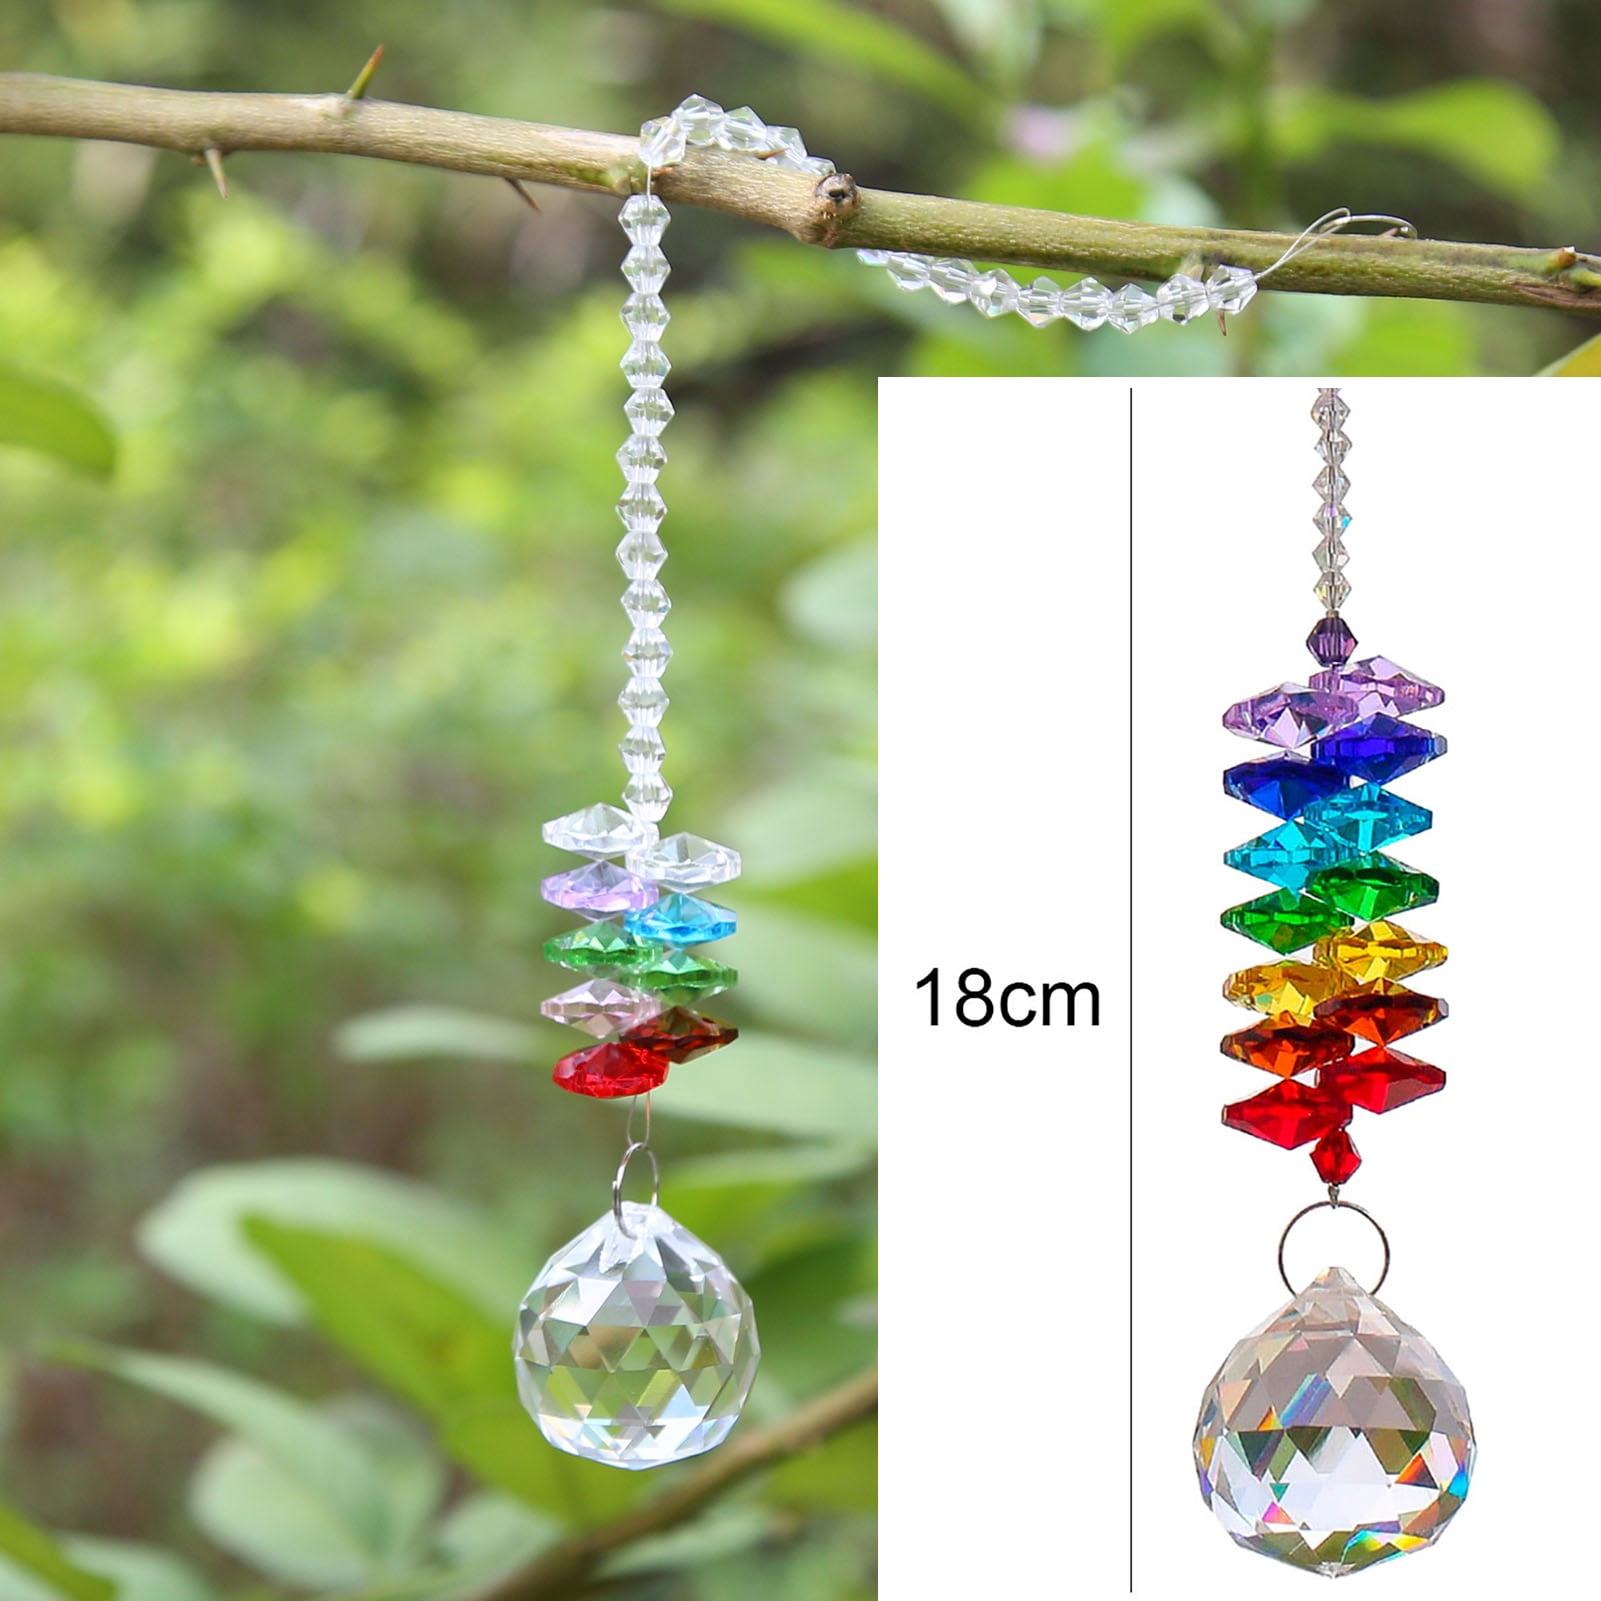 Details about   Tree Of Life Pendant Hanging Crystal Rainbow Maker Suncatcher Glass Prisms Gift 